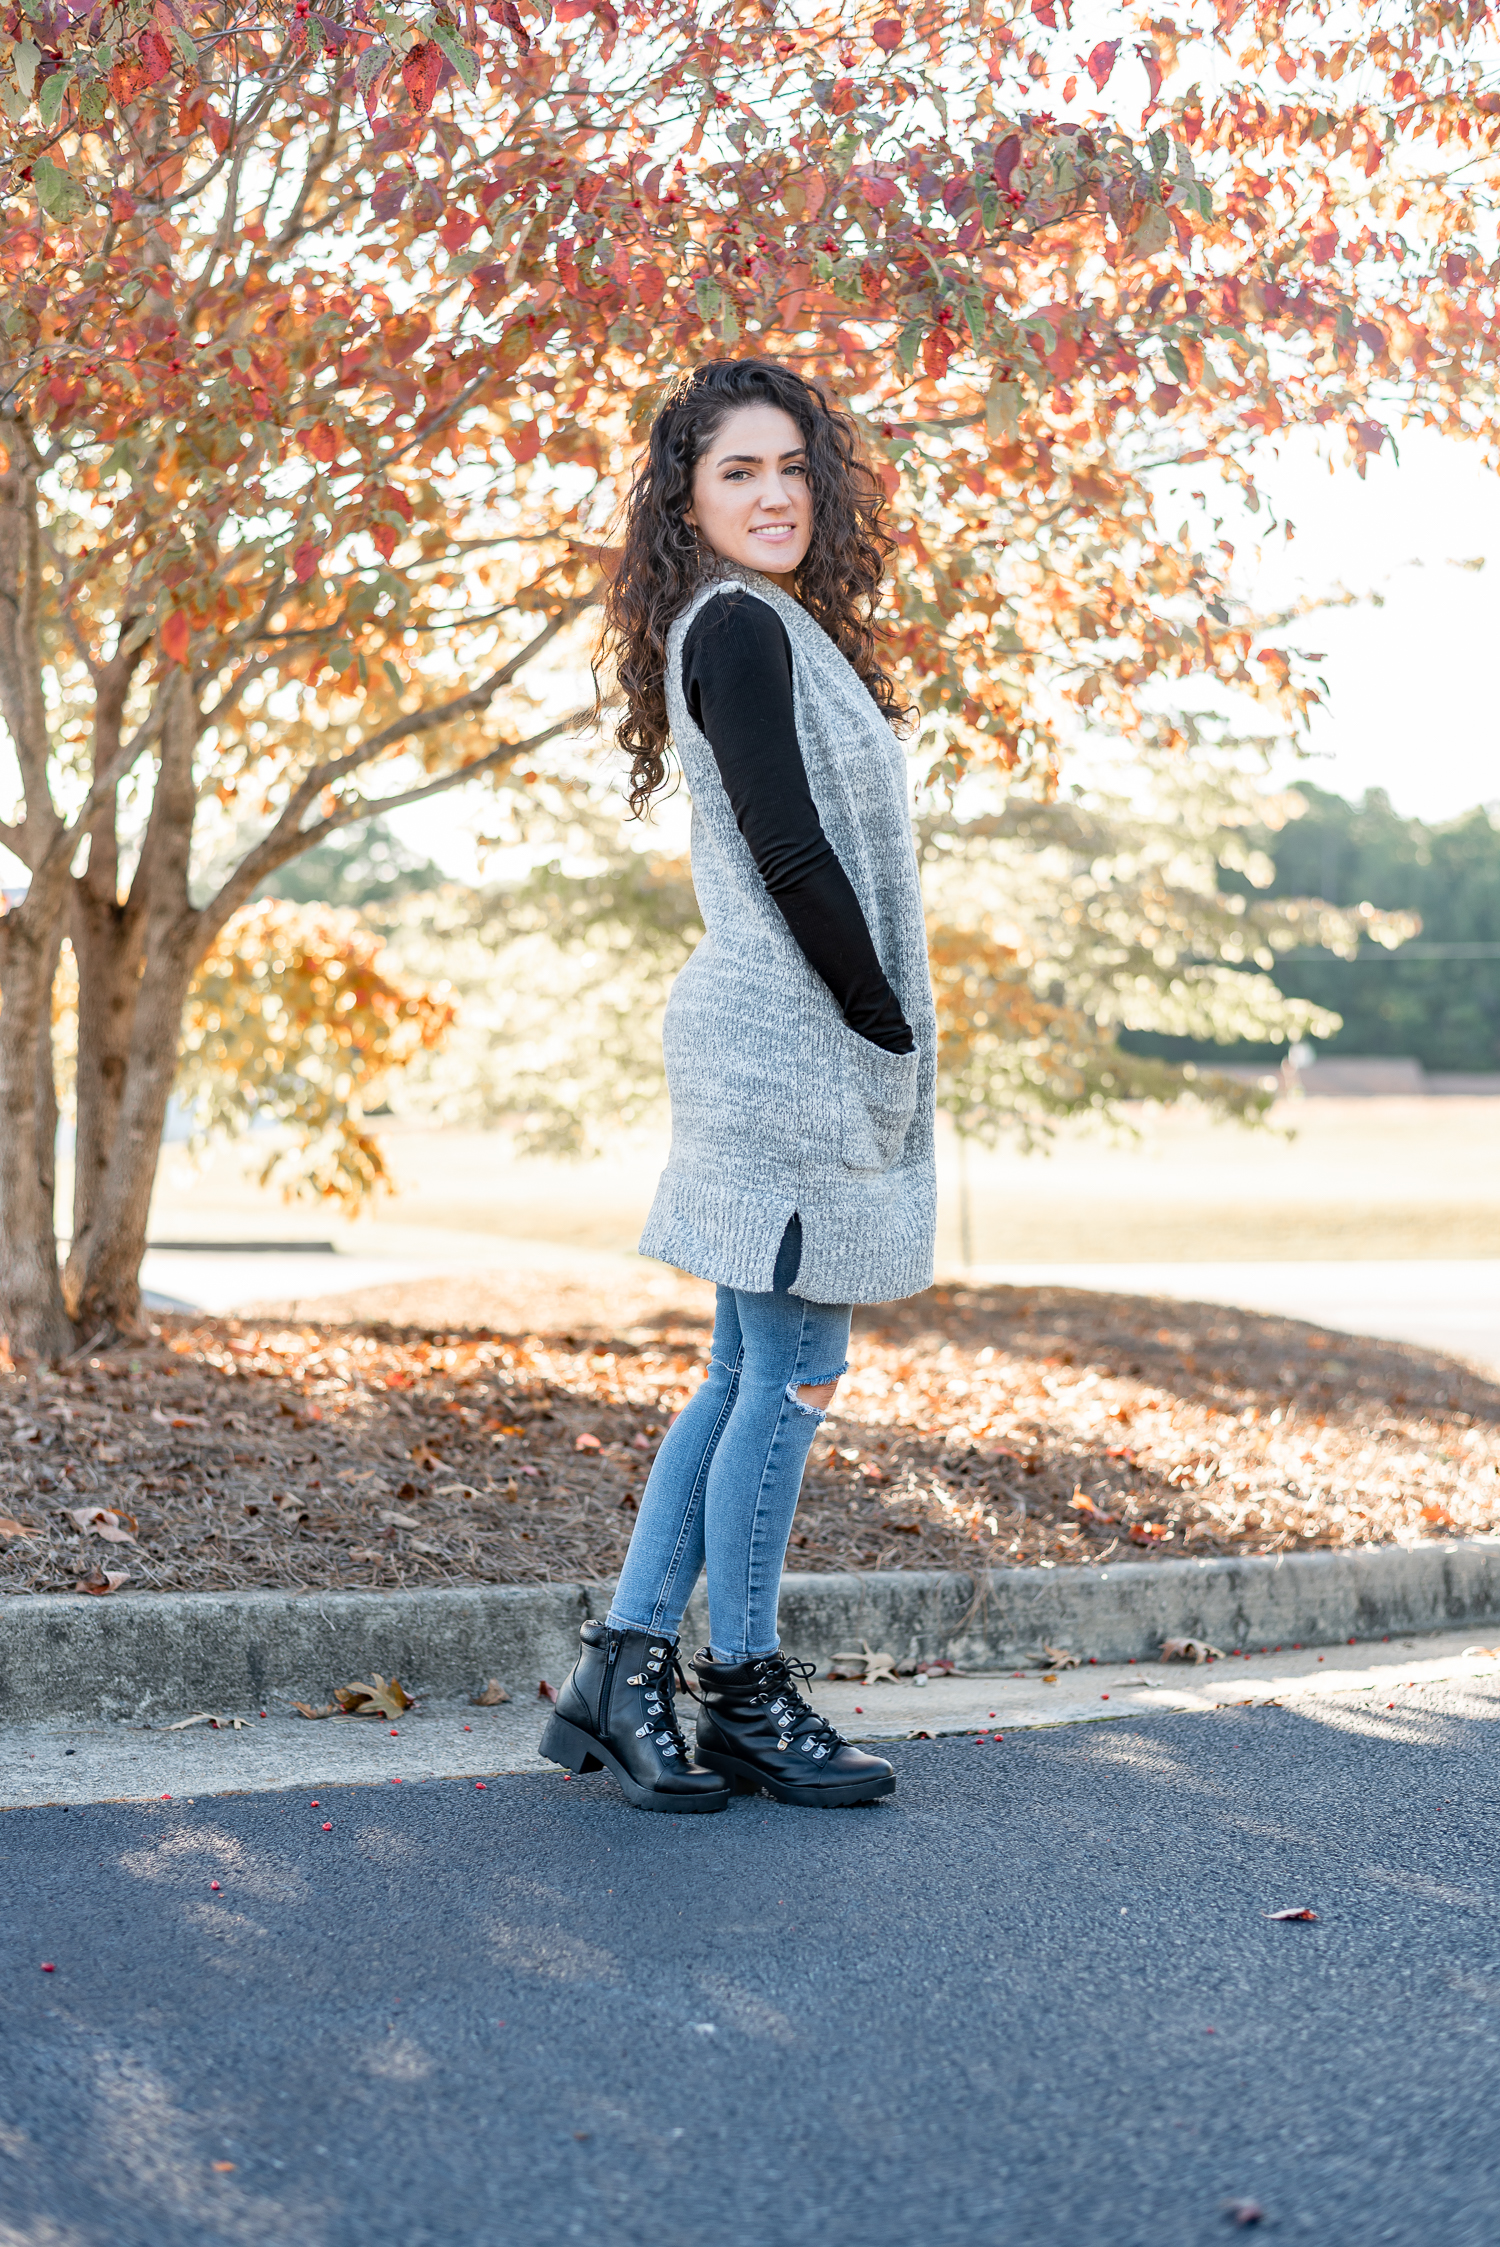 Fall Sweater Vest, Loft Sweater Vest, How to Style a Sweater Vest, Atlanta Style Bloggers, Erica Valentin, Bloggers from Atlanta, Fall Outfit Ideas, How to Style Combat Boots